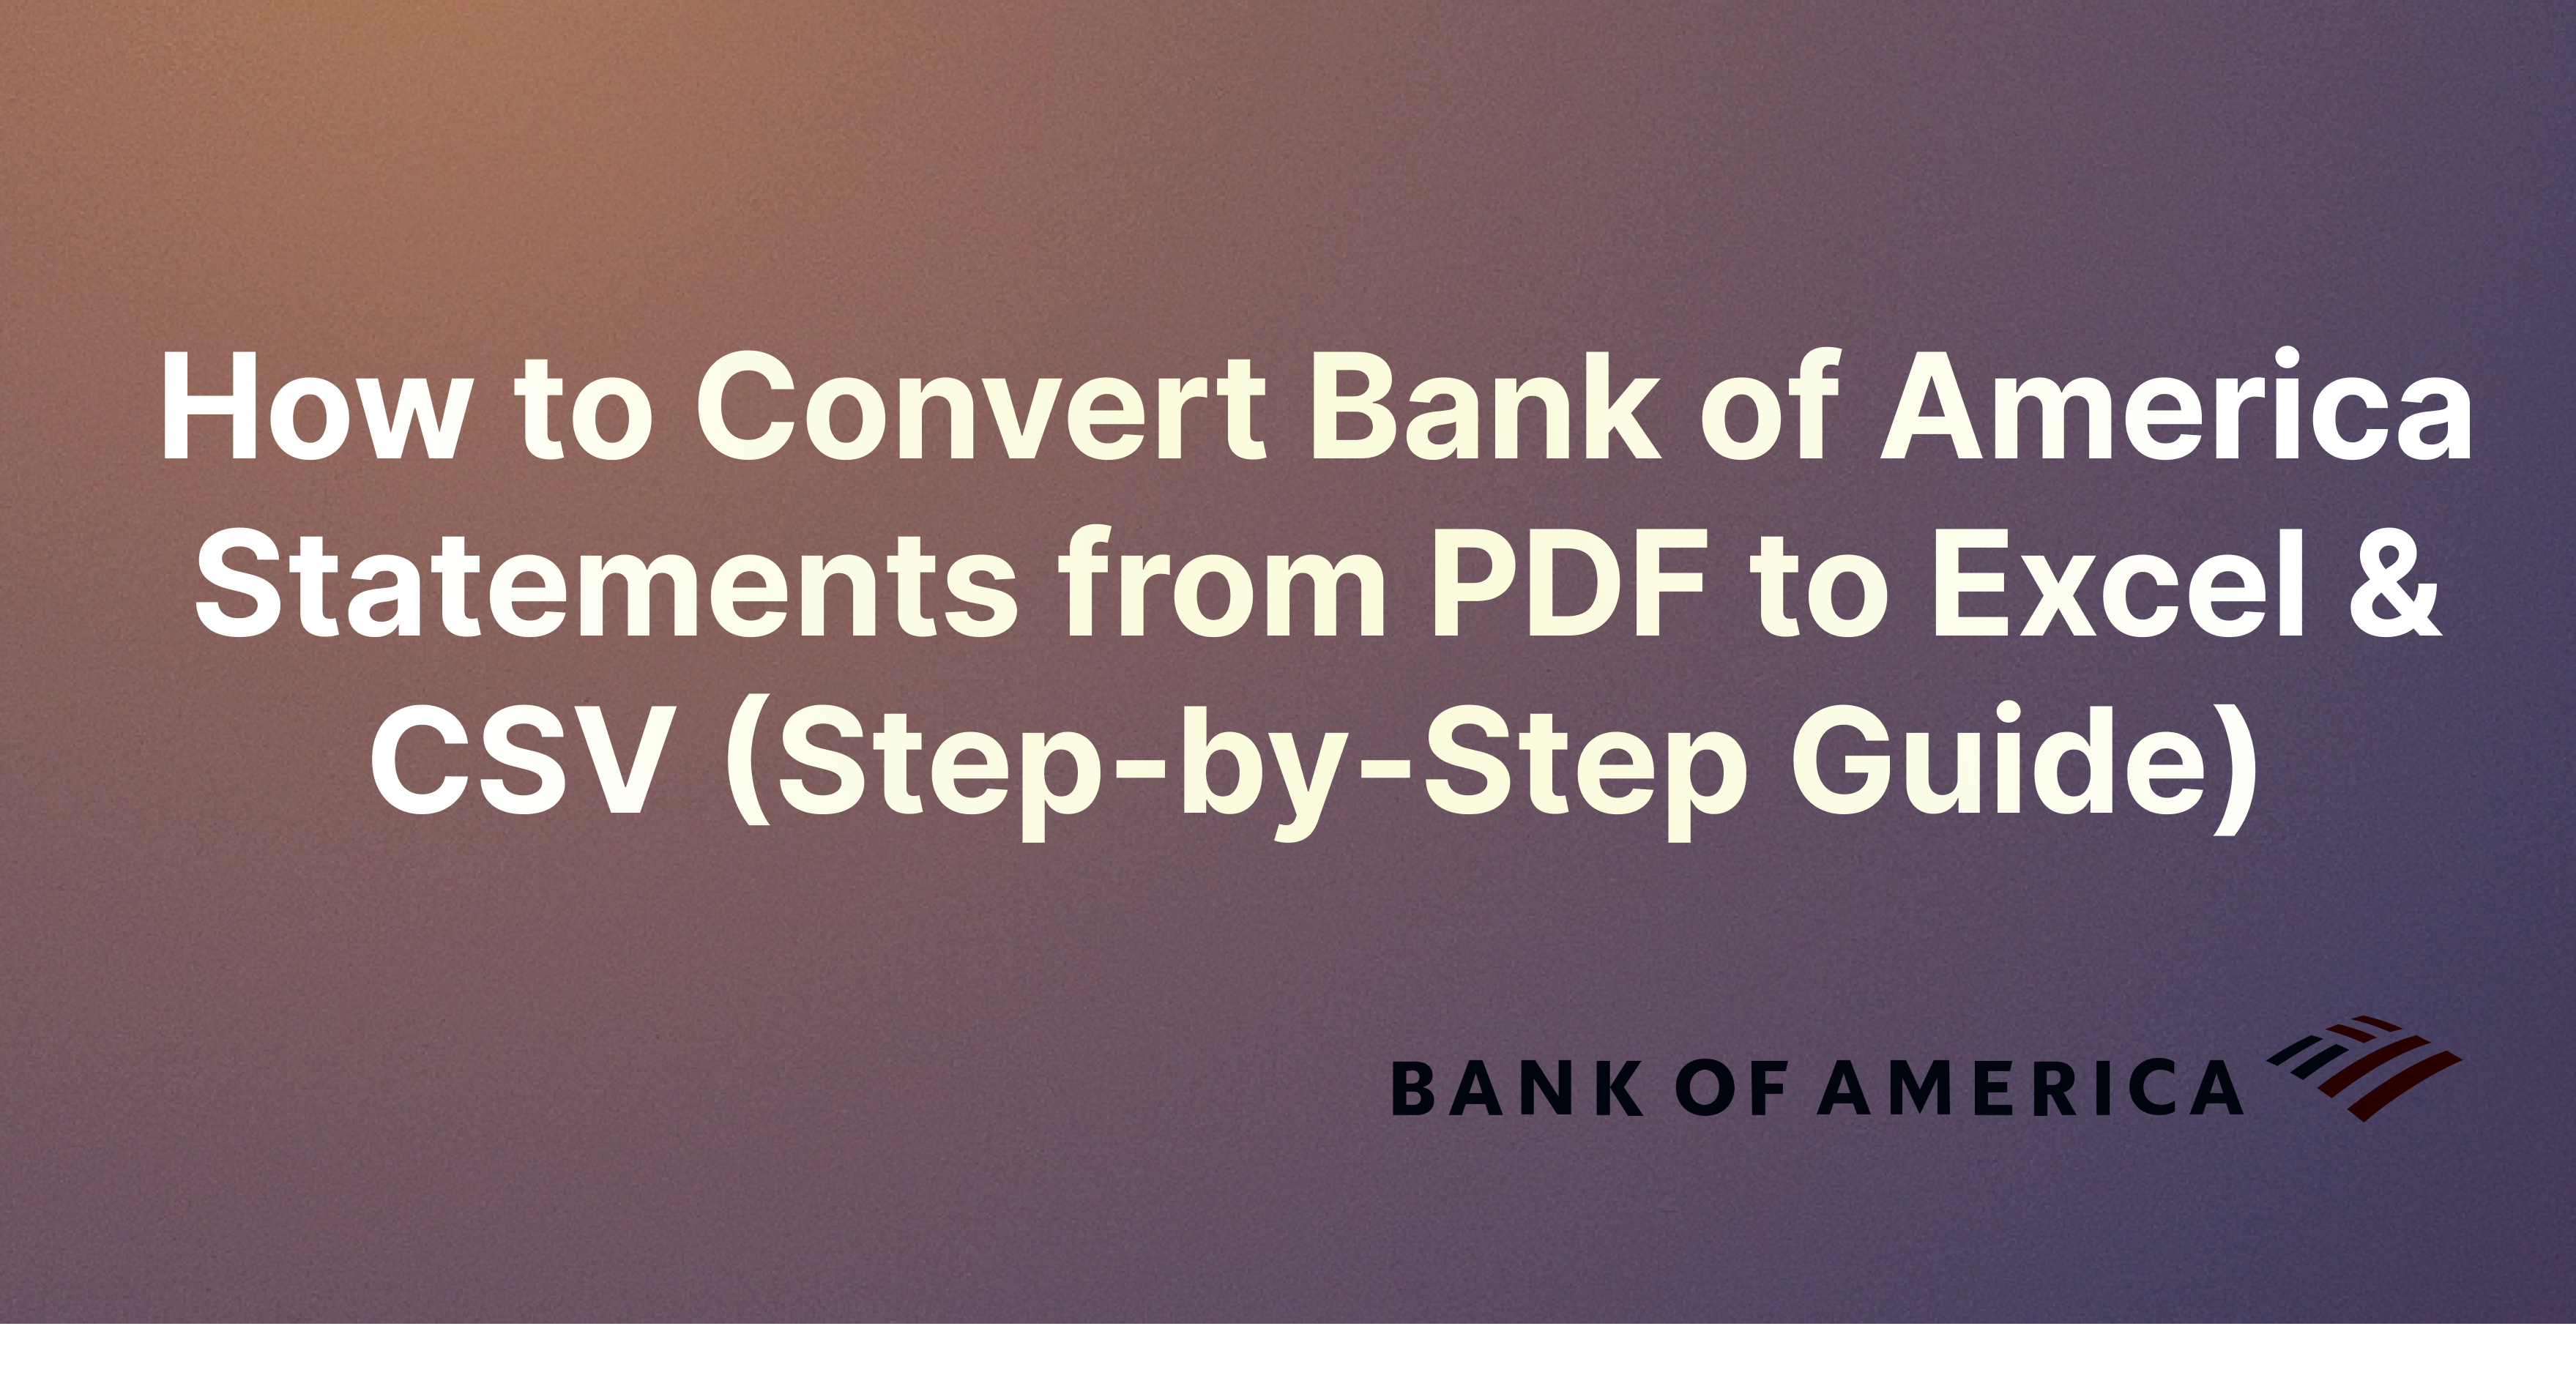 How to Convert Bank of America Statements from PDF to Excel & CSV (Step-by-Step Guide)